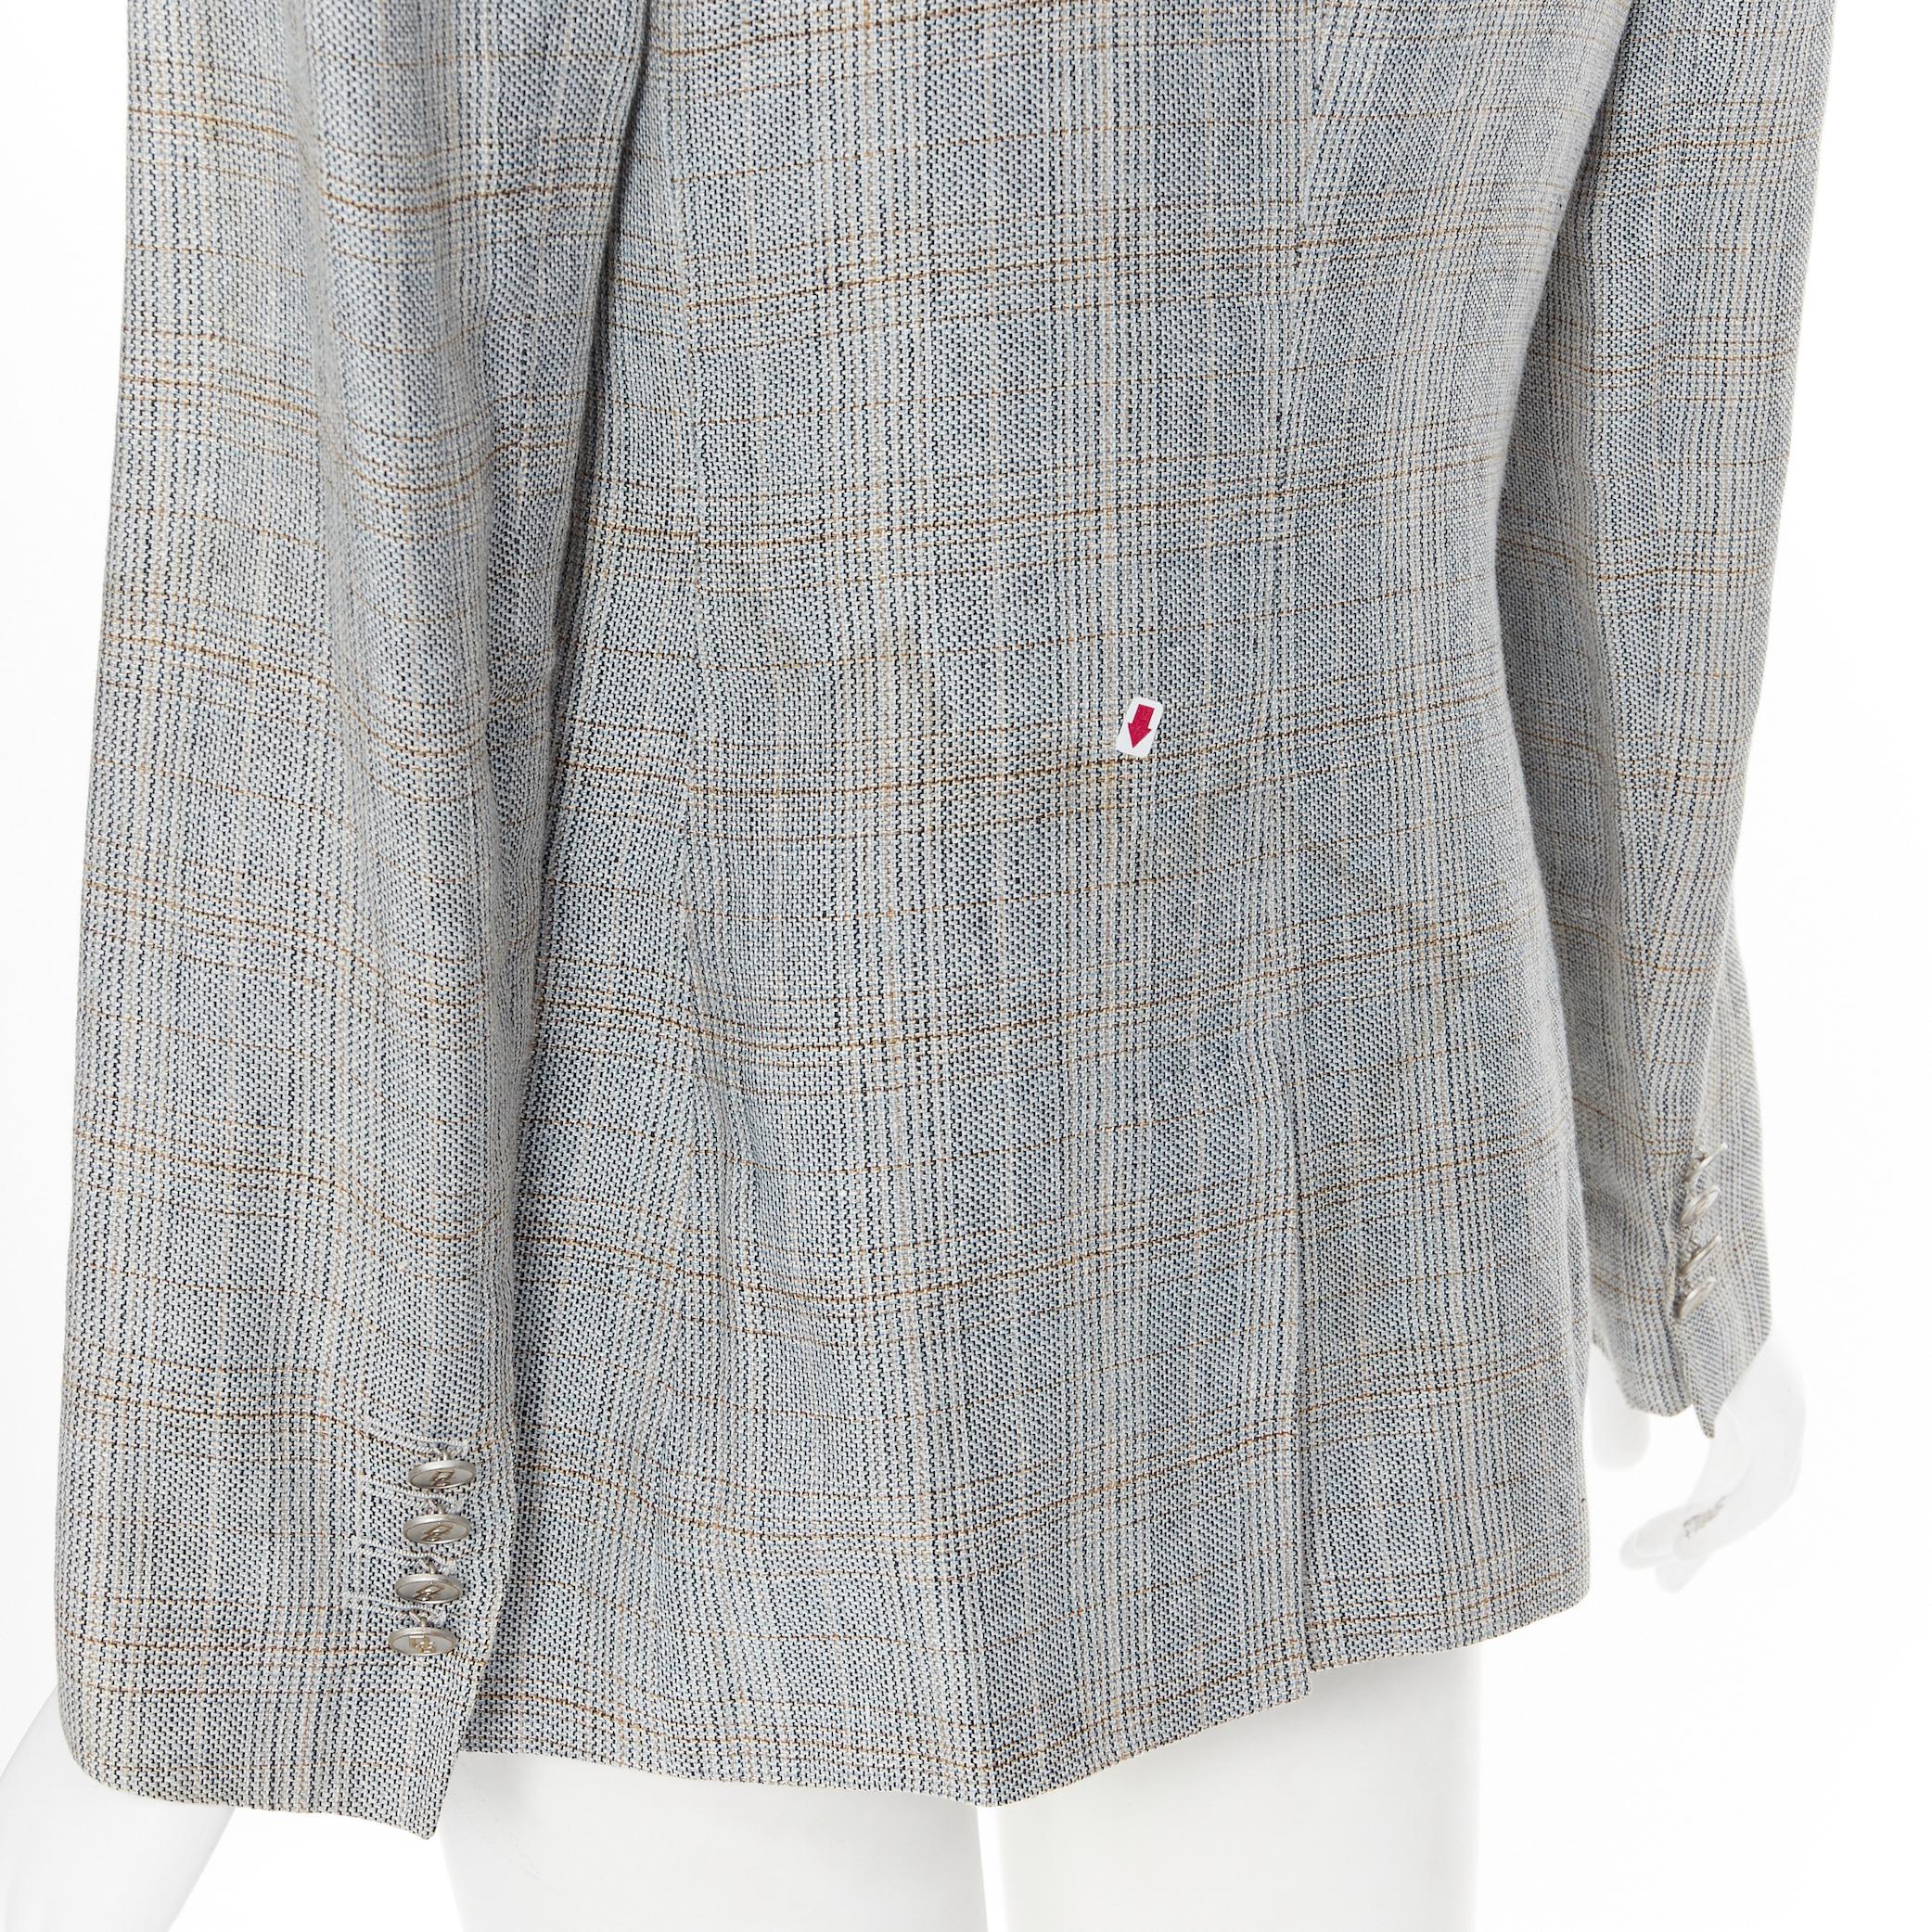 DOLCE GABBANA blue check wool tweed one button cutaway blazer pant suit IT42 M For Sale 3